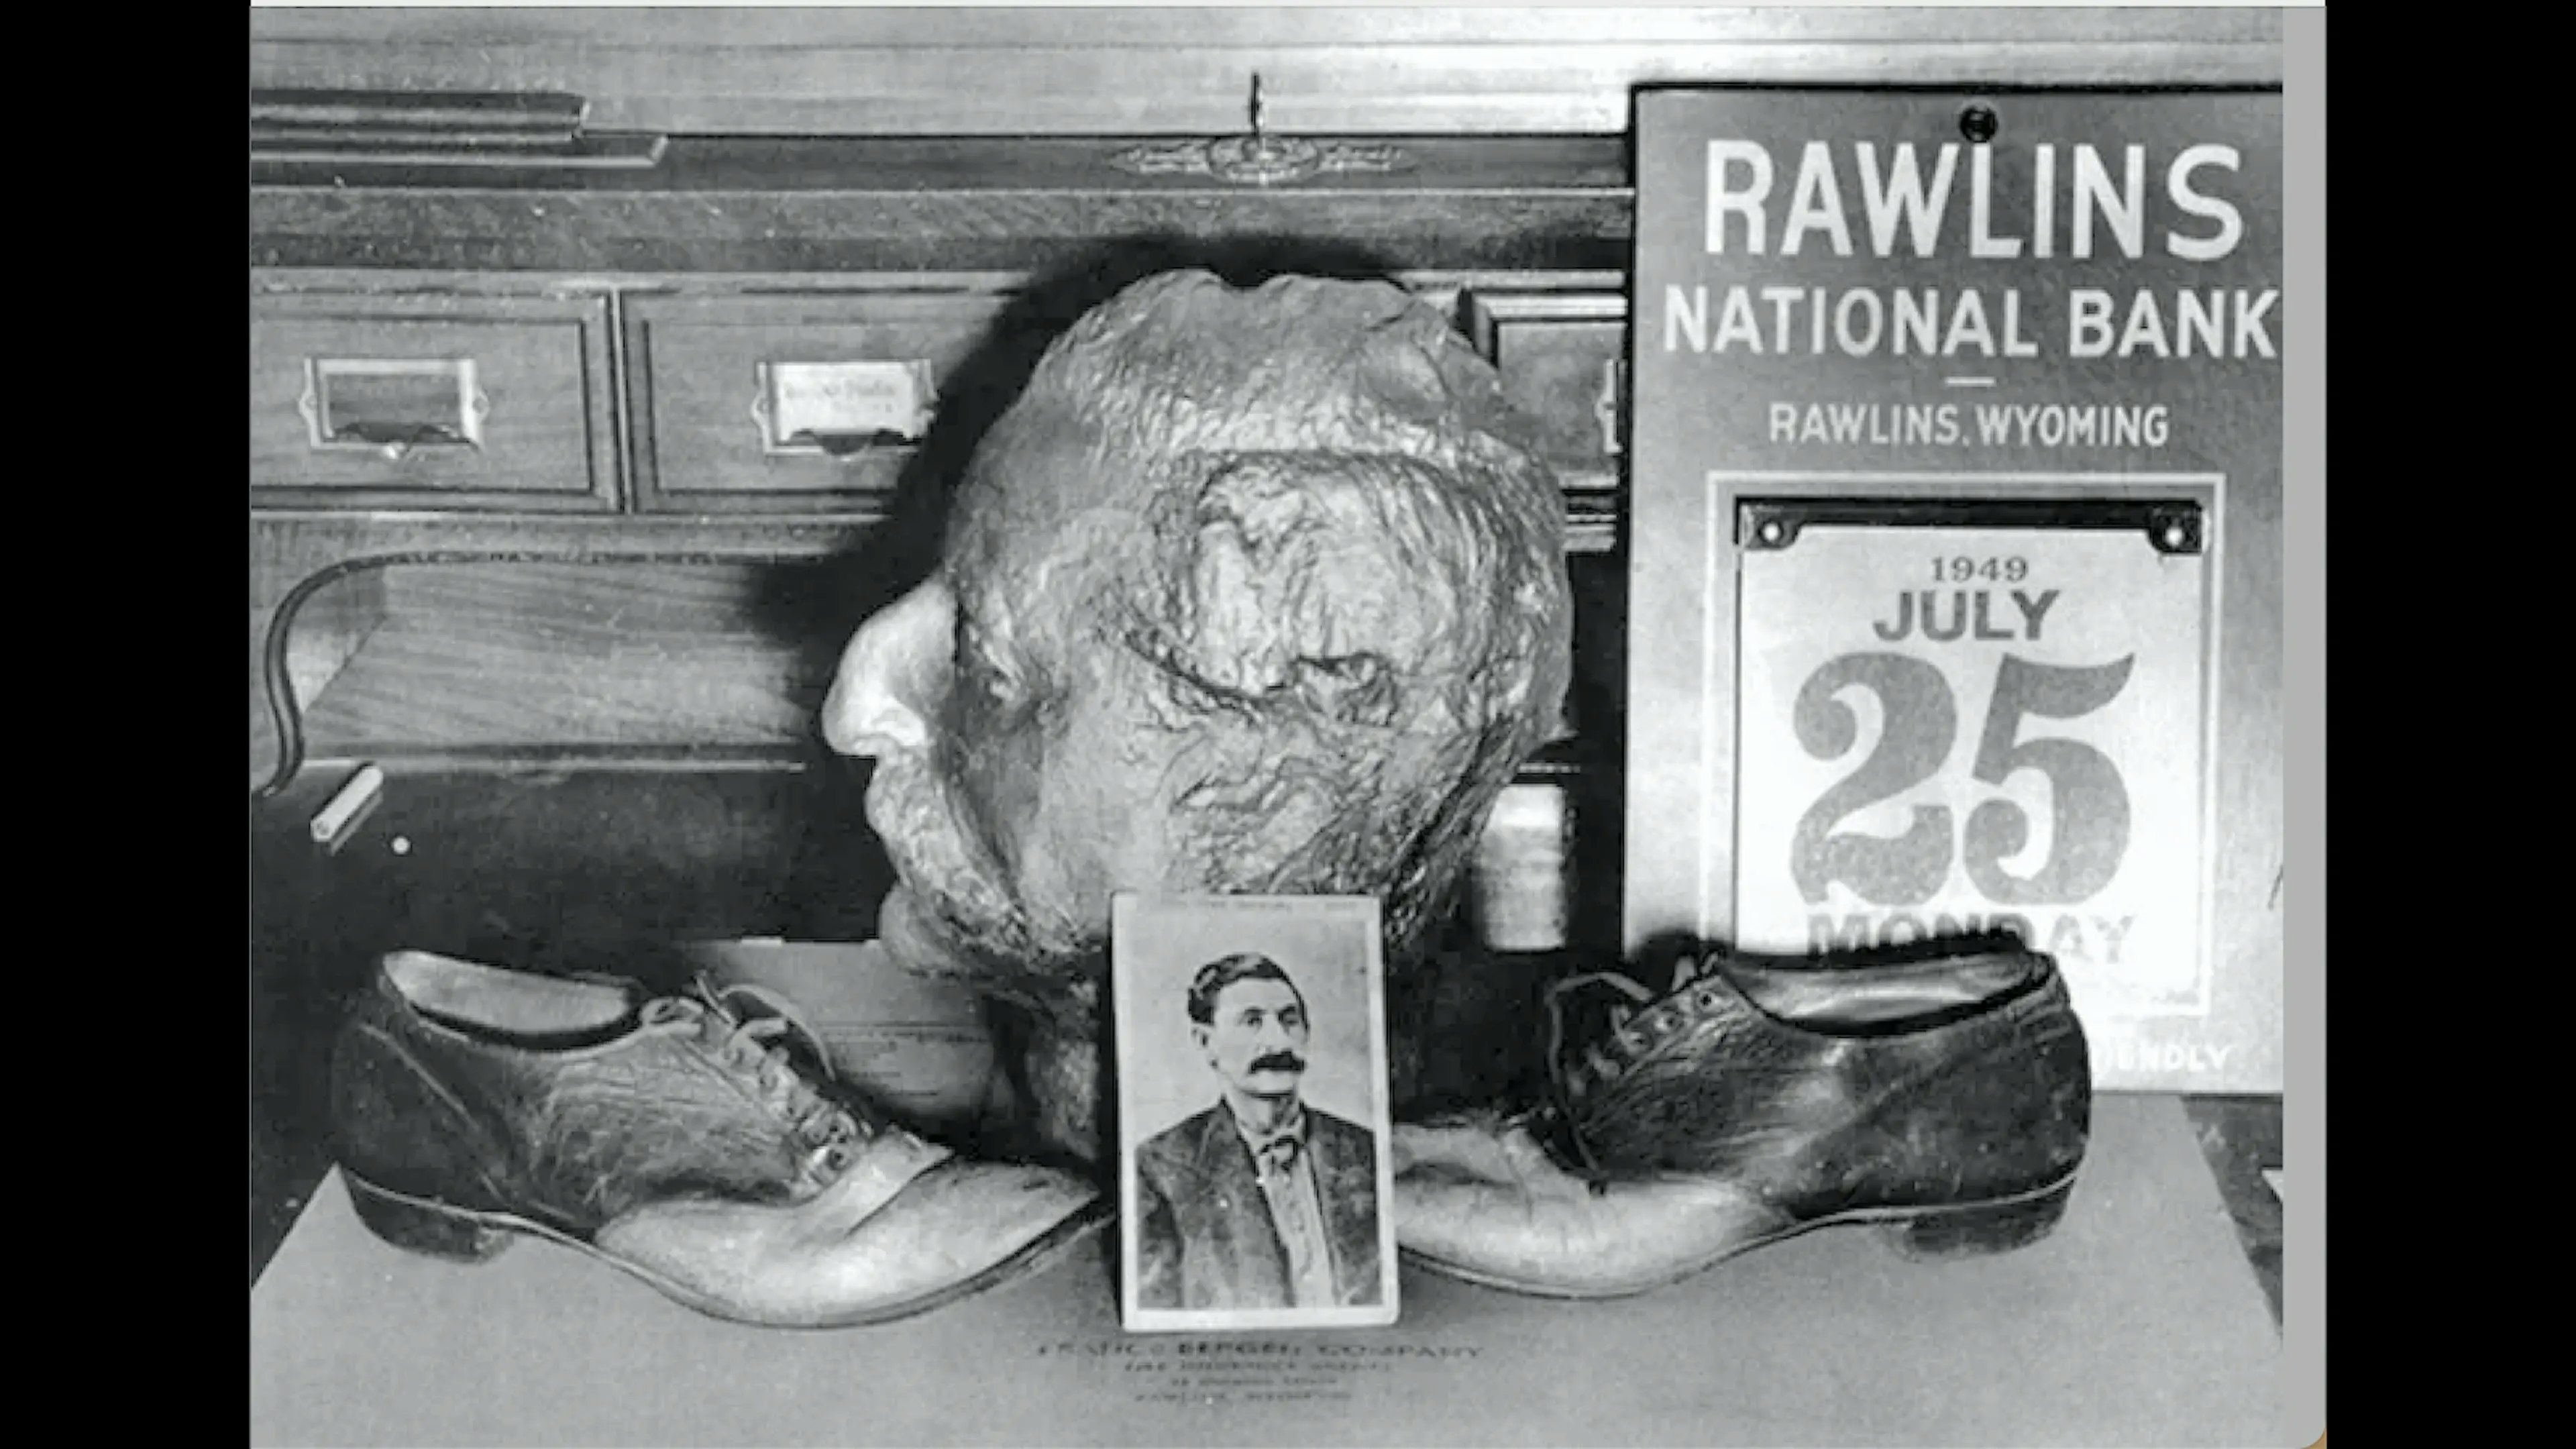 The death mask of "Big Nose" George Parrott, along with a pair of shoes made from his skin and other artifacts, on display in the Rawlins Bank in 1949.